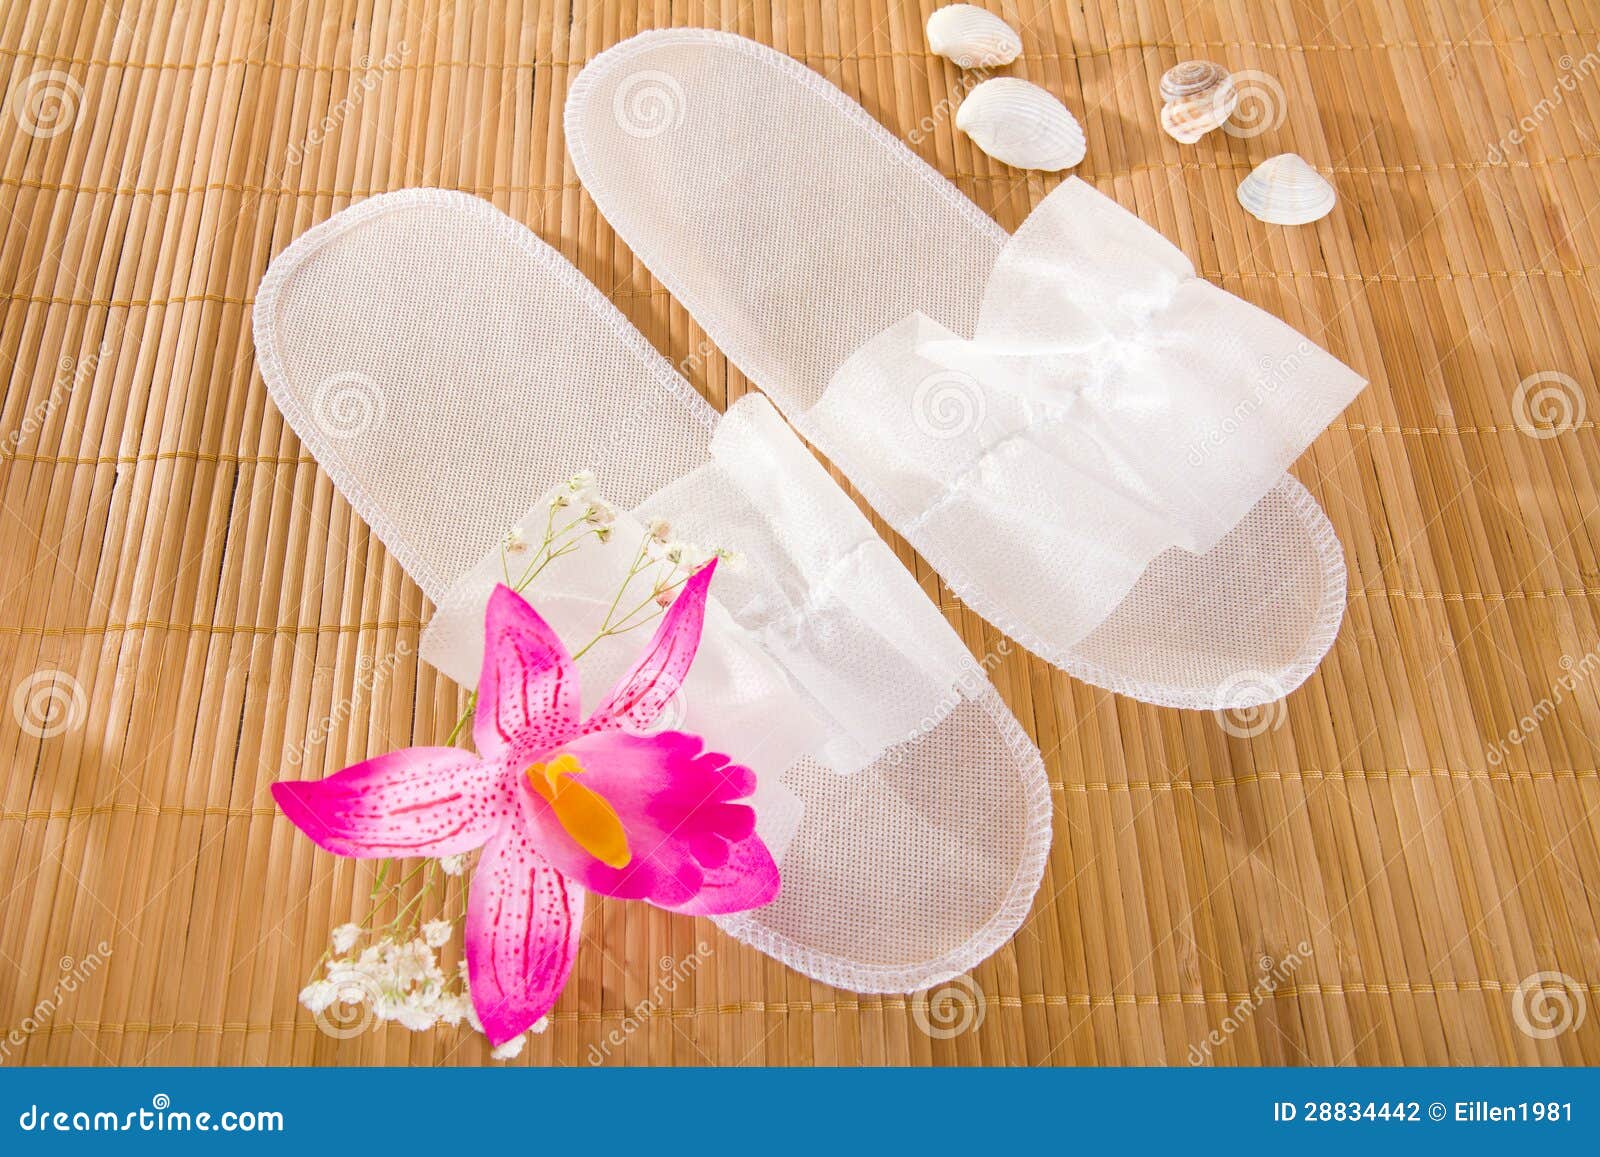 Spa Hotel Single Use Slippers On Stock Photo 125818457 | Shutterstock